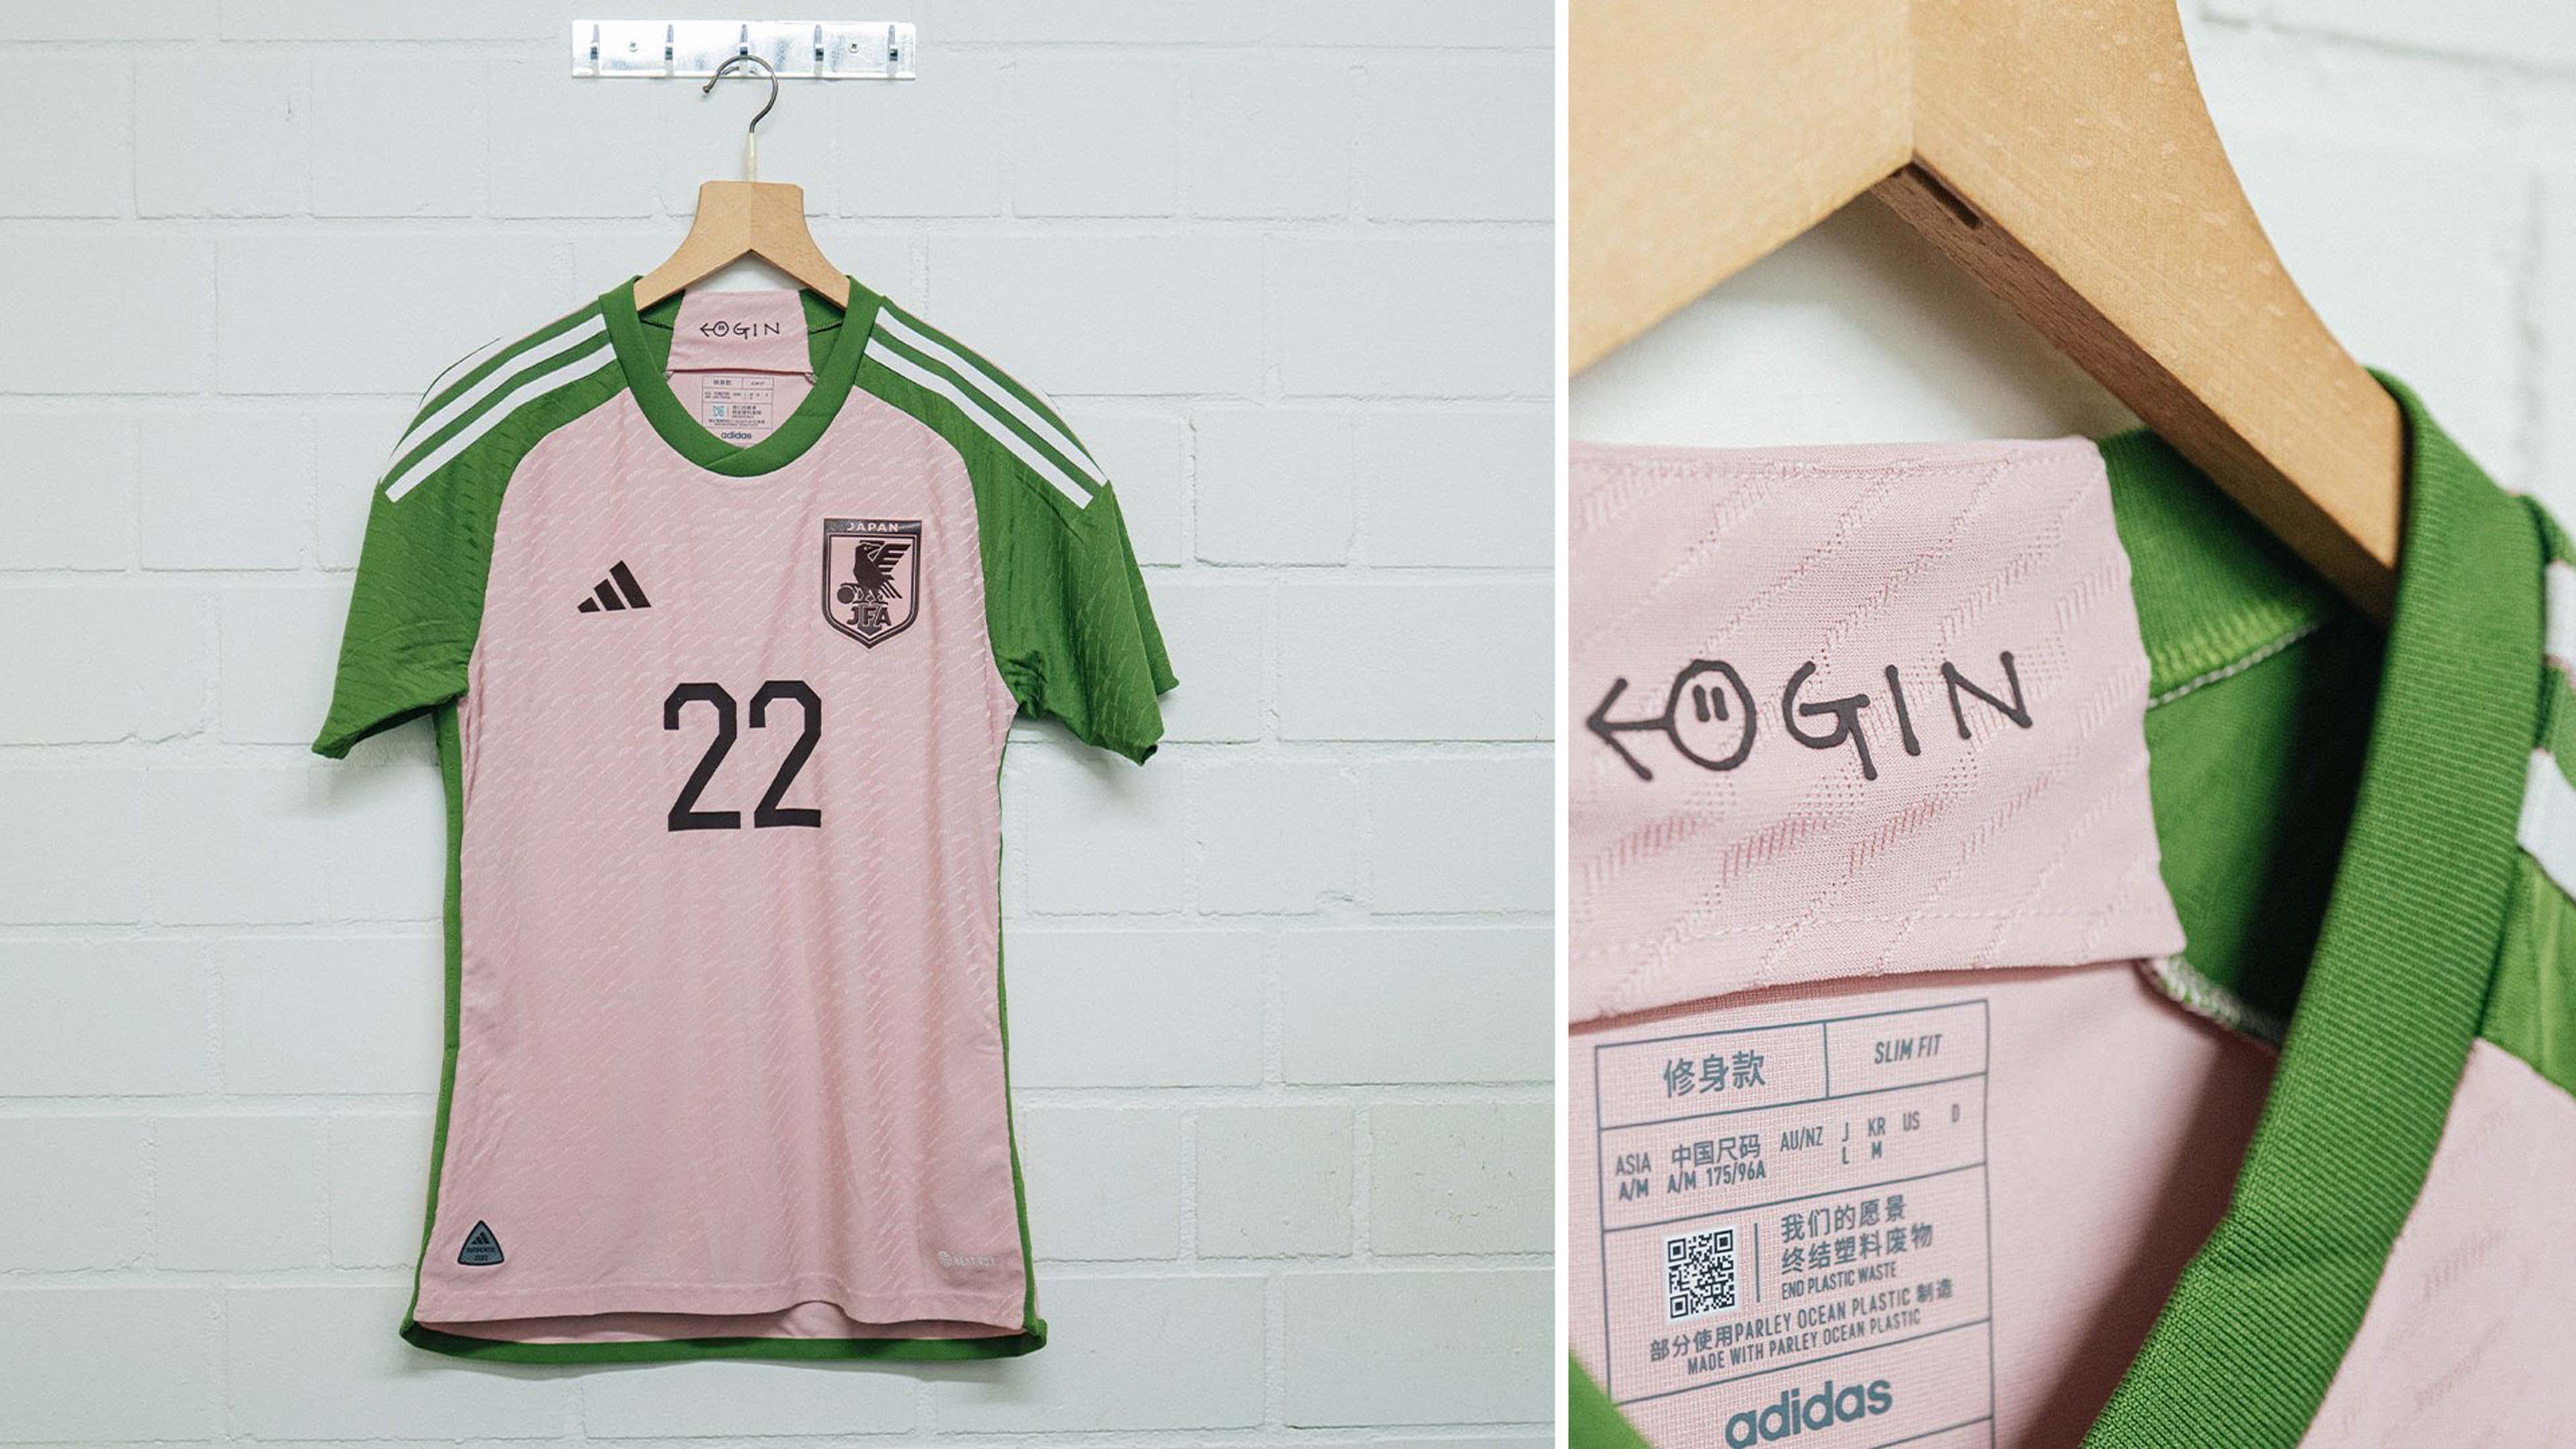 adidas unveils special collection for Japan designed by NIGO for the ...